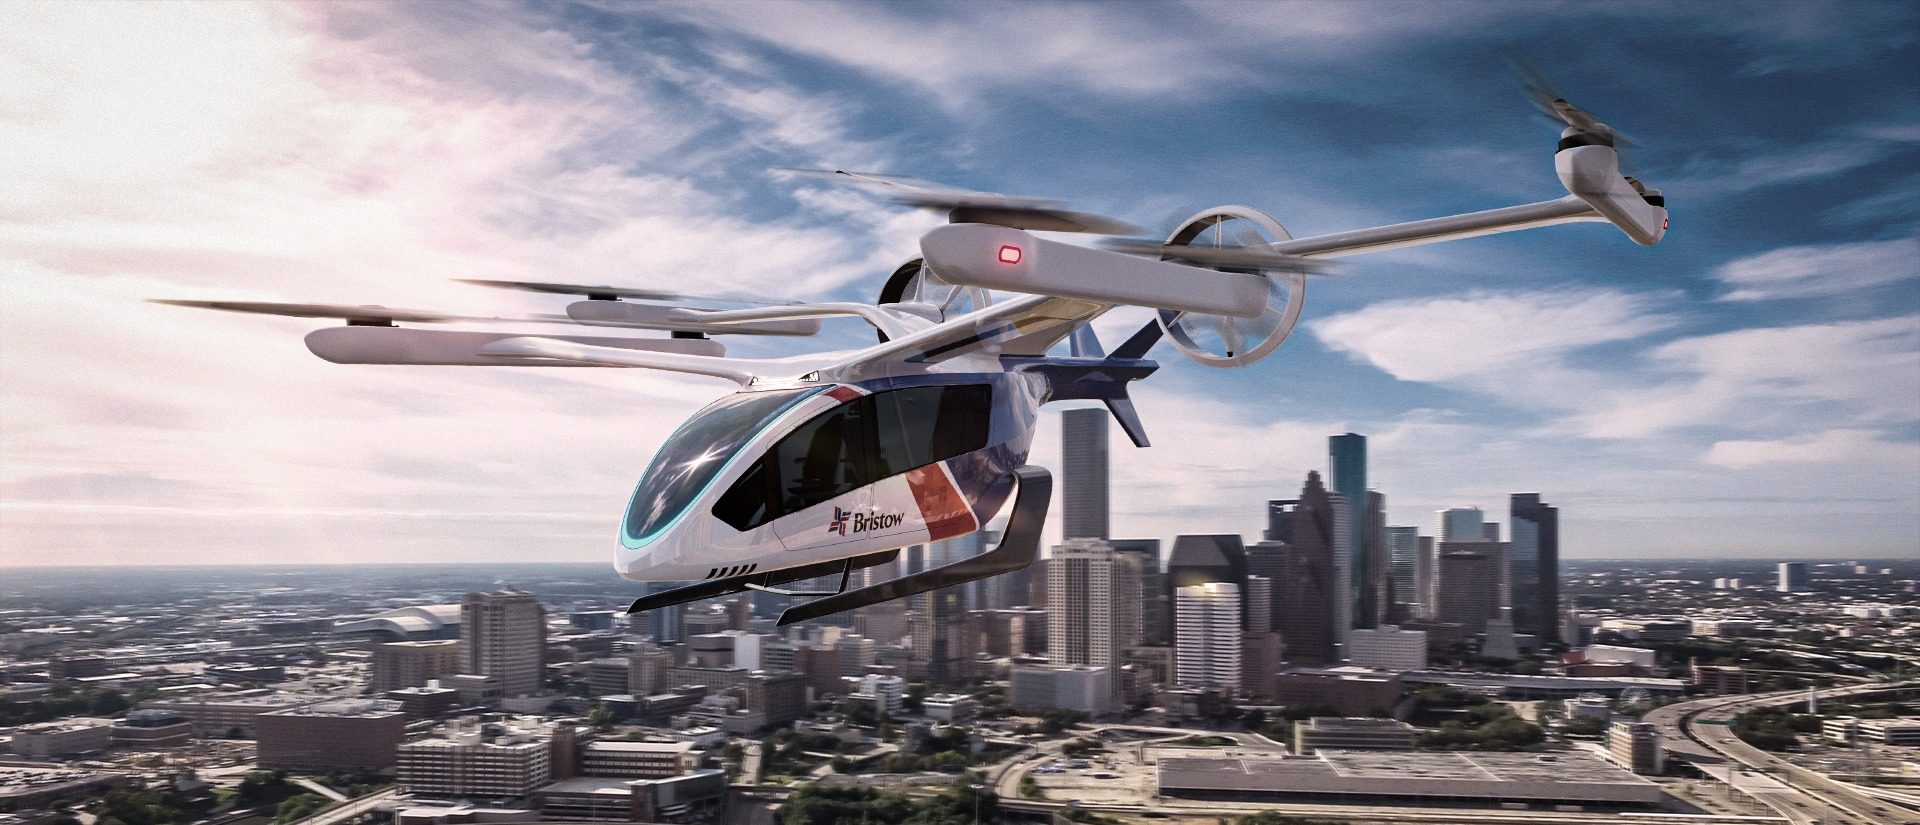 Eve and Bristow enter partnership to develop UAM capabilities with an order of up to 100 eVTOLs